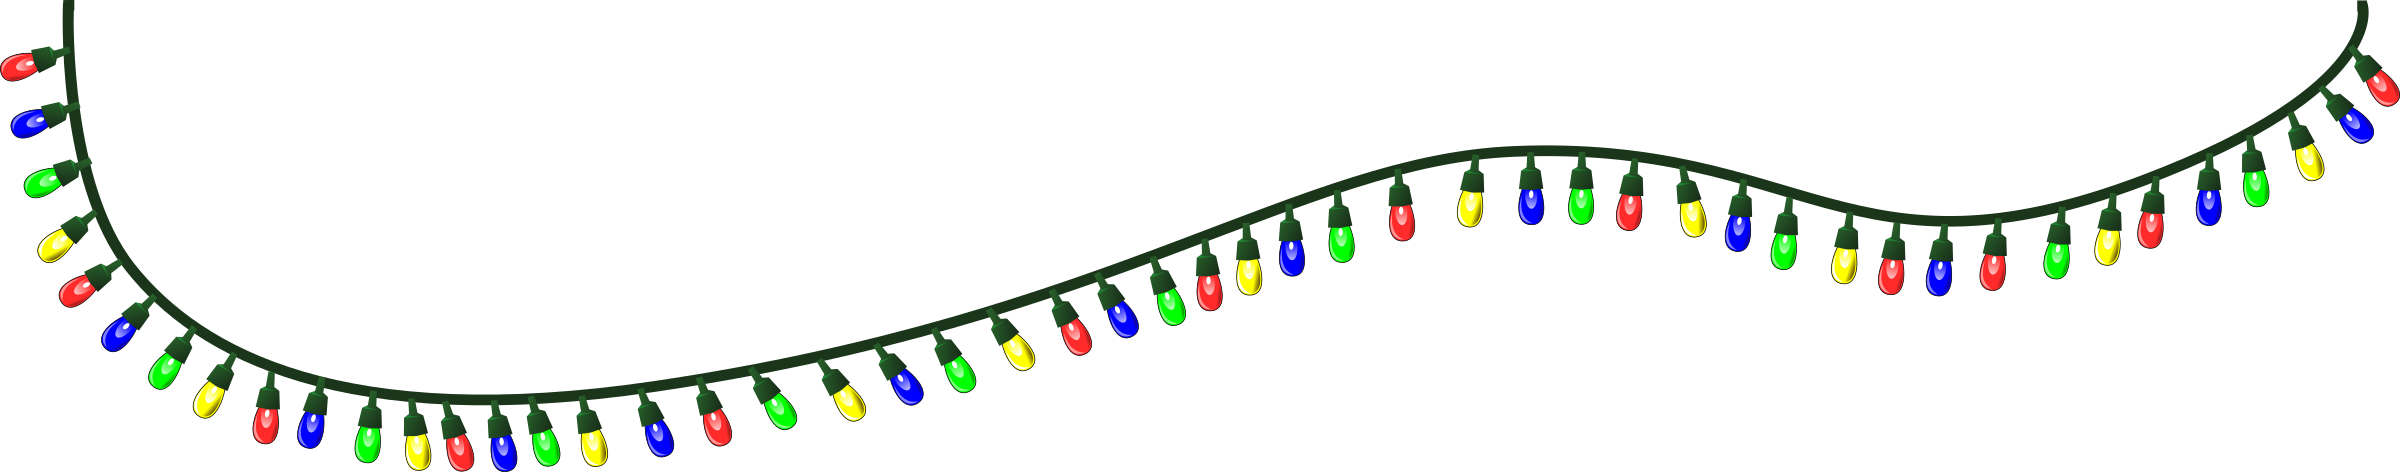 Clipart Christmas Lights Png Images Clipart